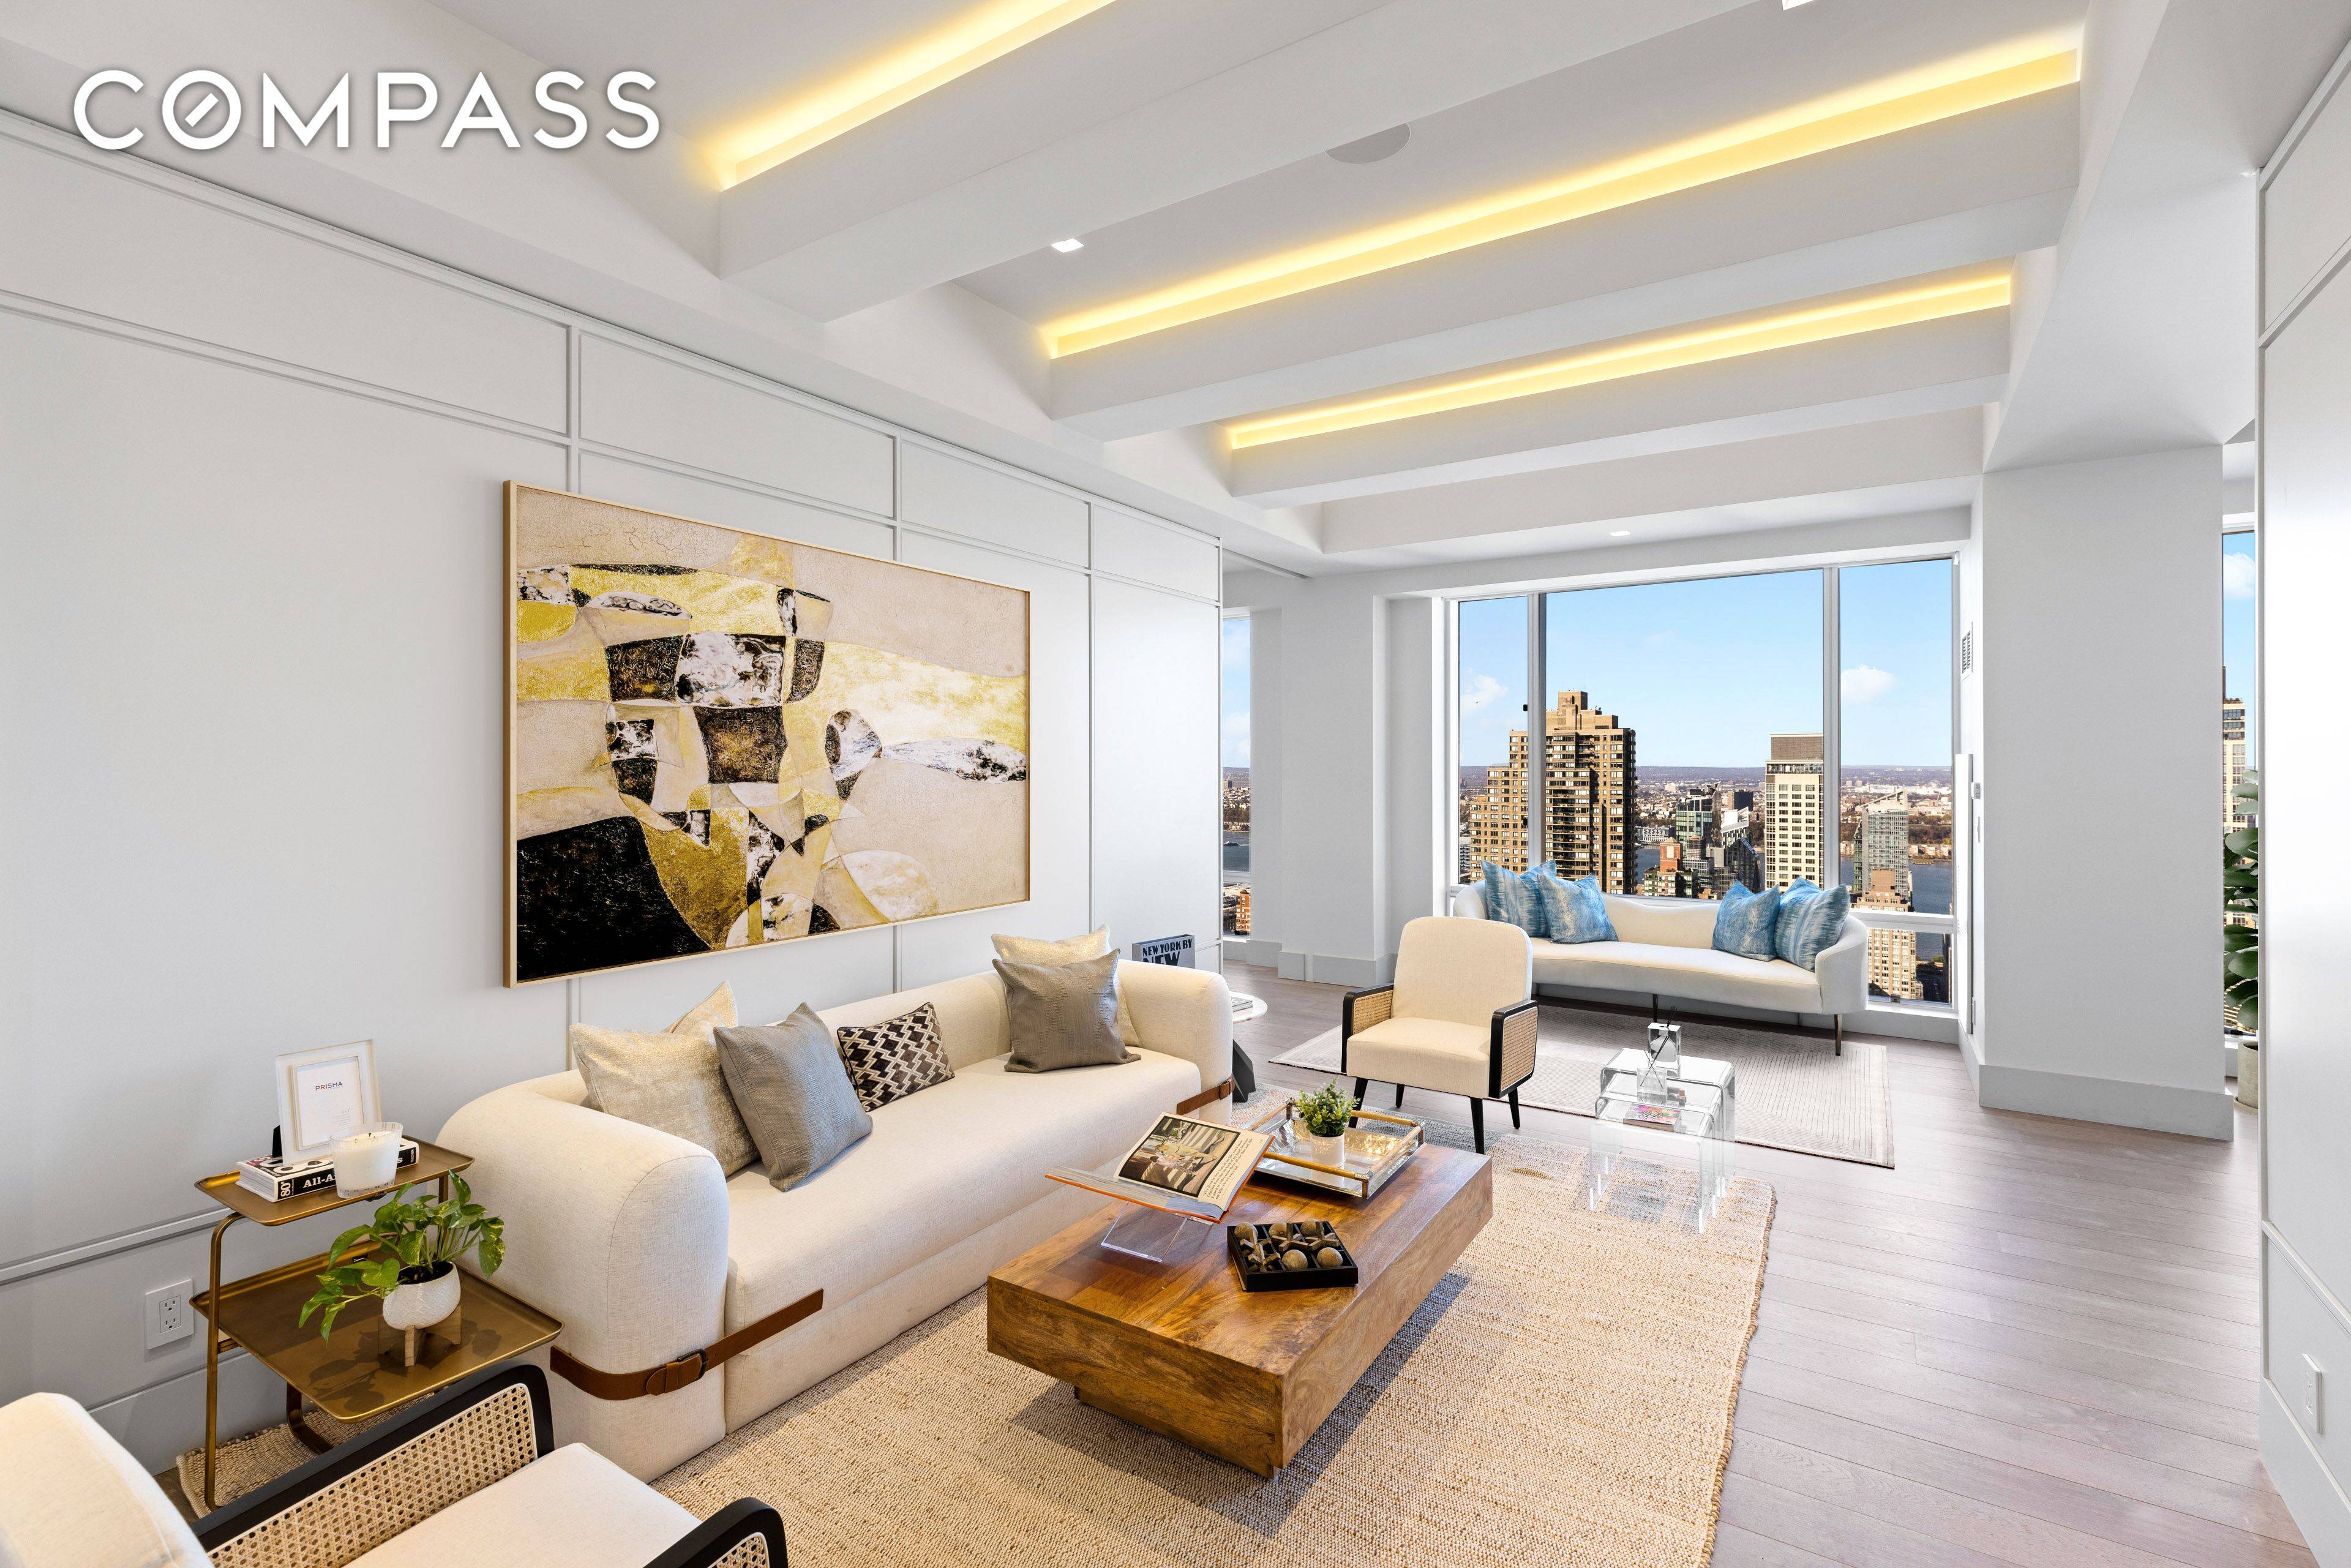 Residence 47D at 1 Central Park West is a luxurious three beds, three and a half baths condo with breathtaking panoramic views of the Hudson River and the NYC skyline ...